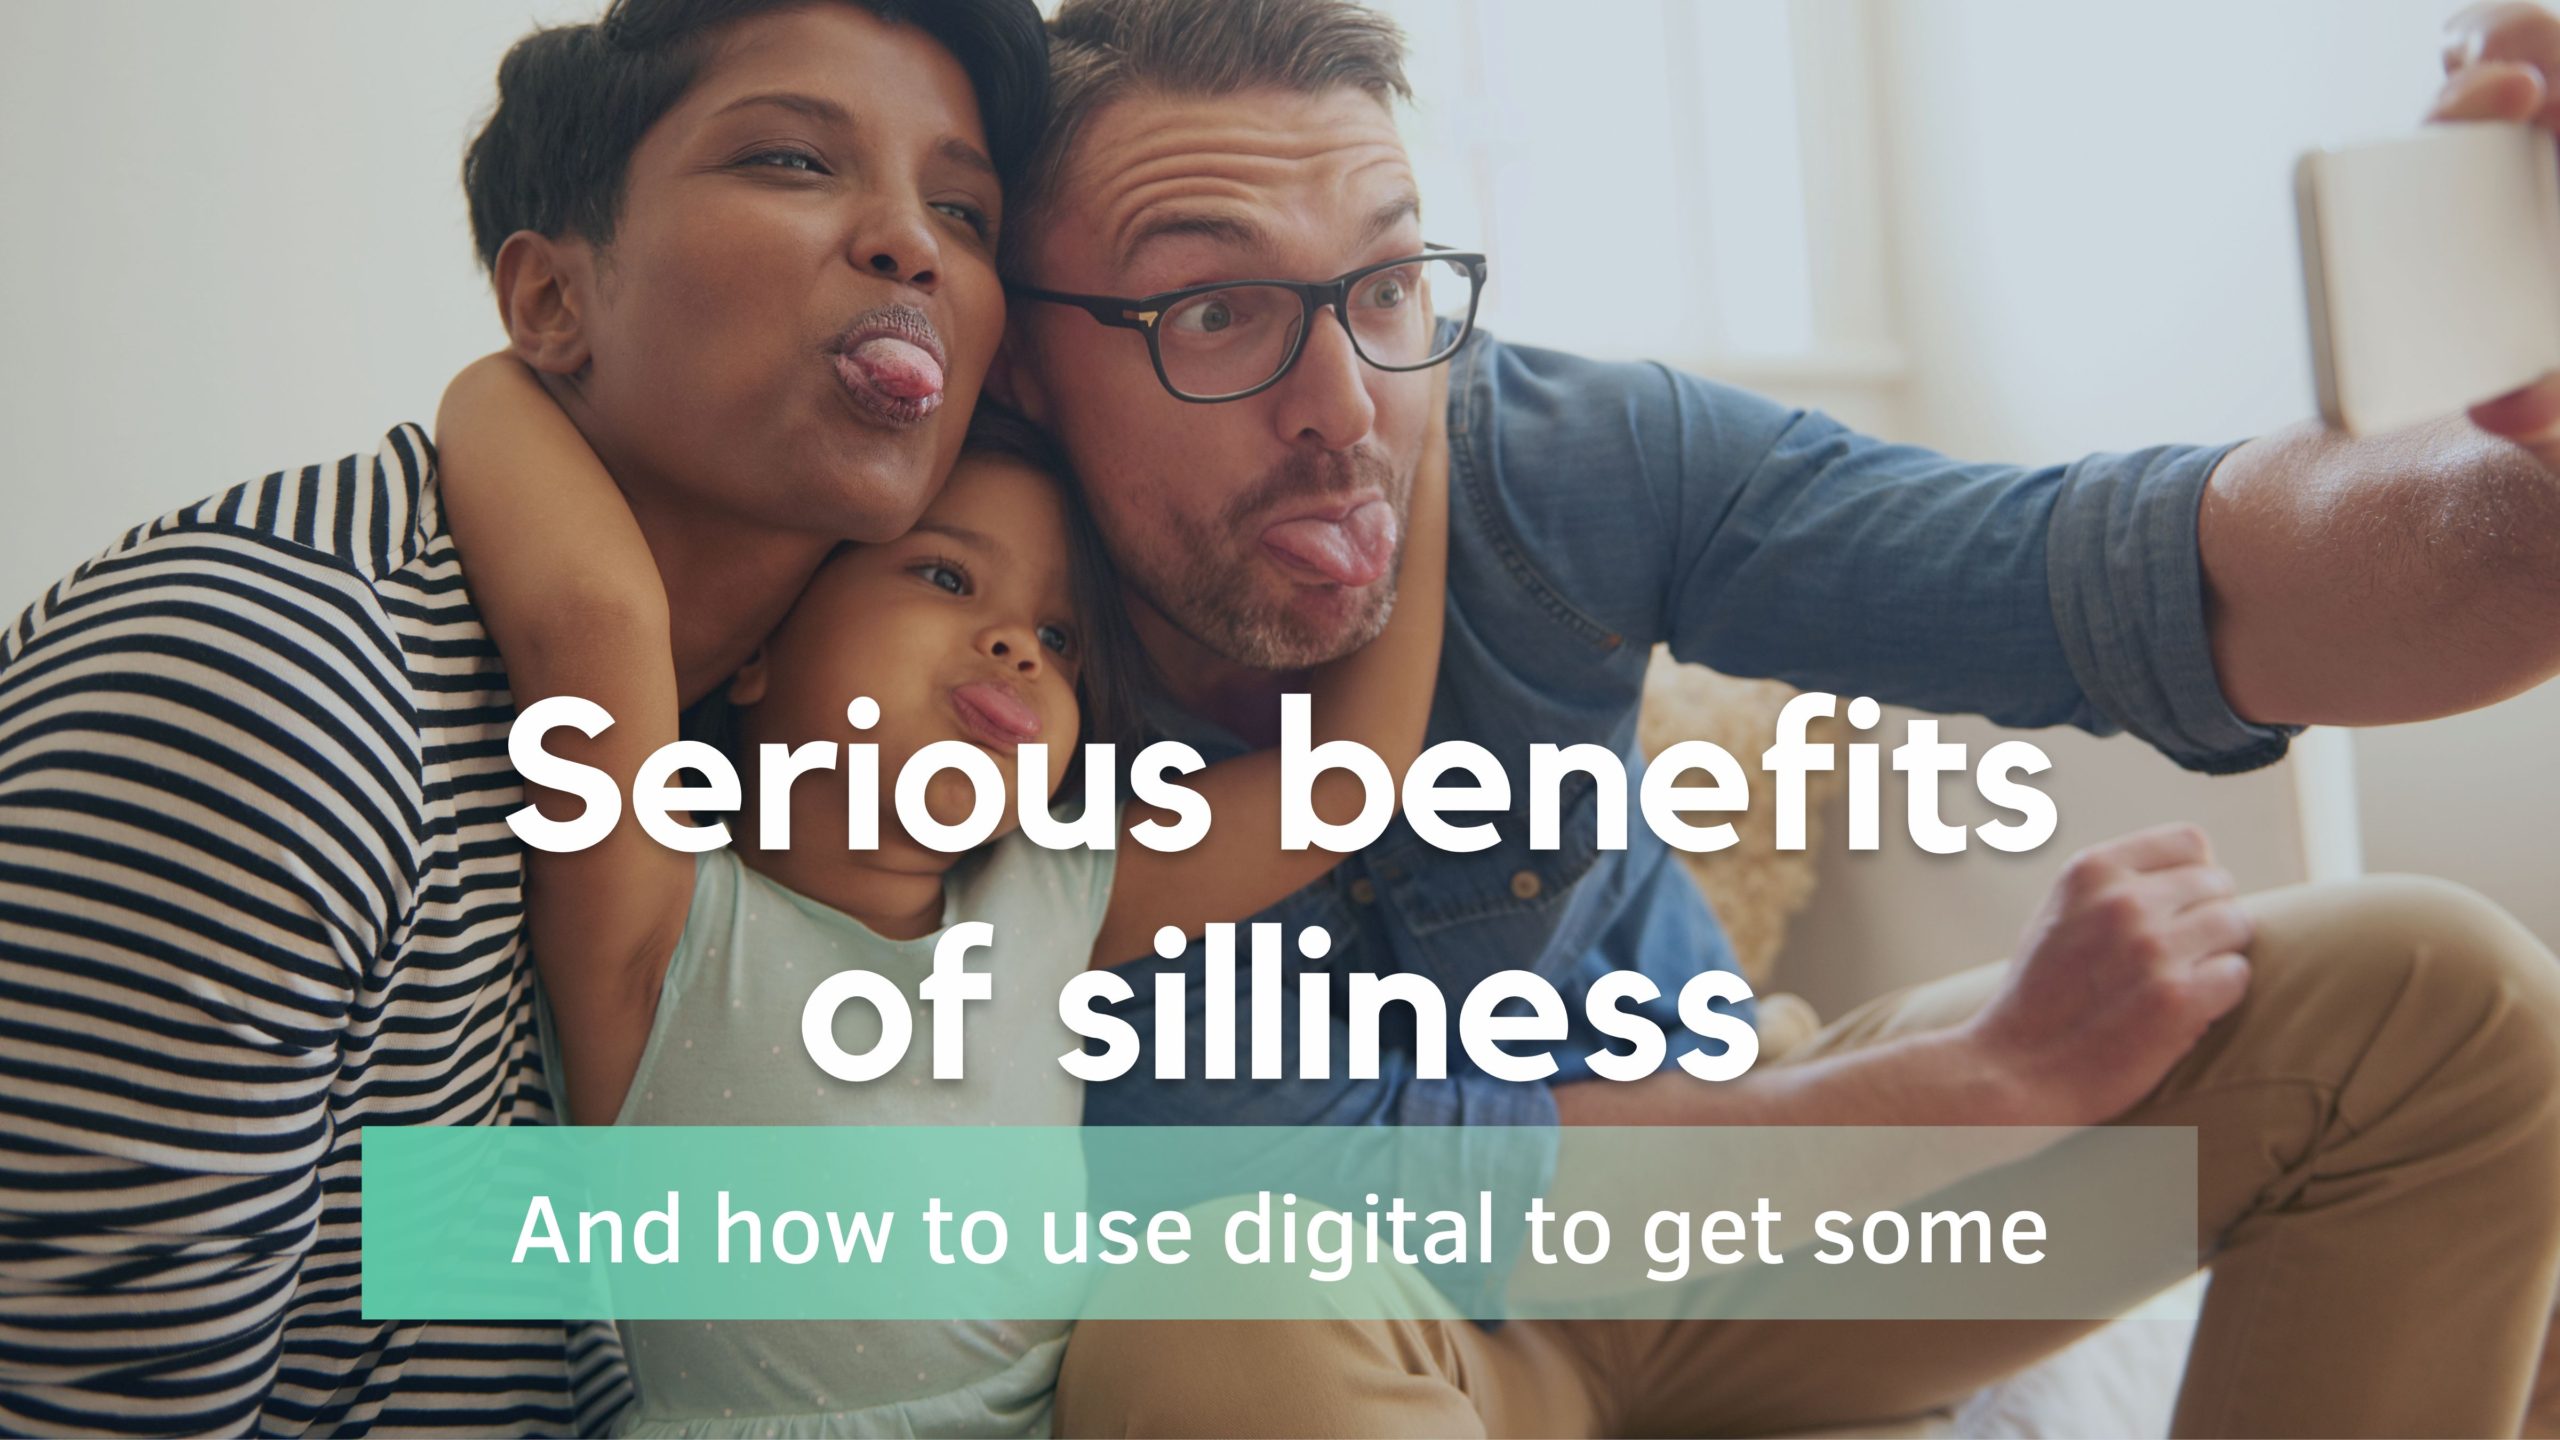 Benefits of sillines and how to use digital to get some